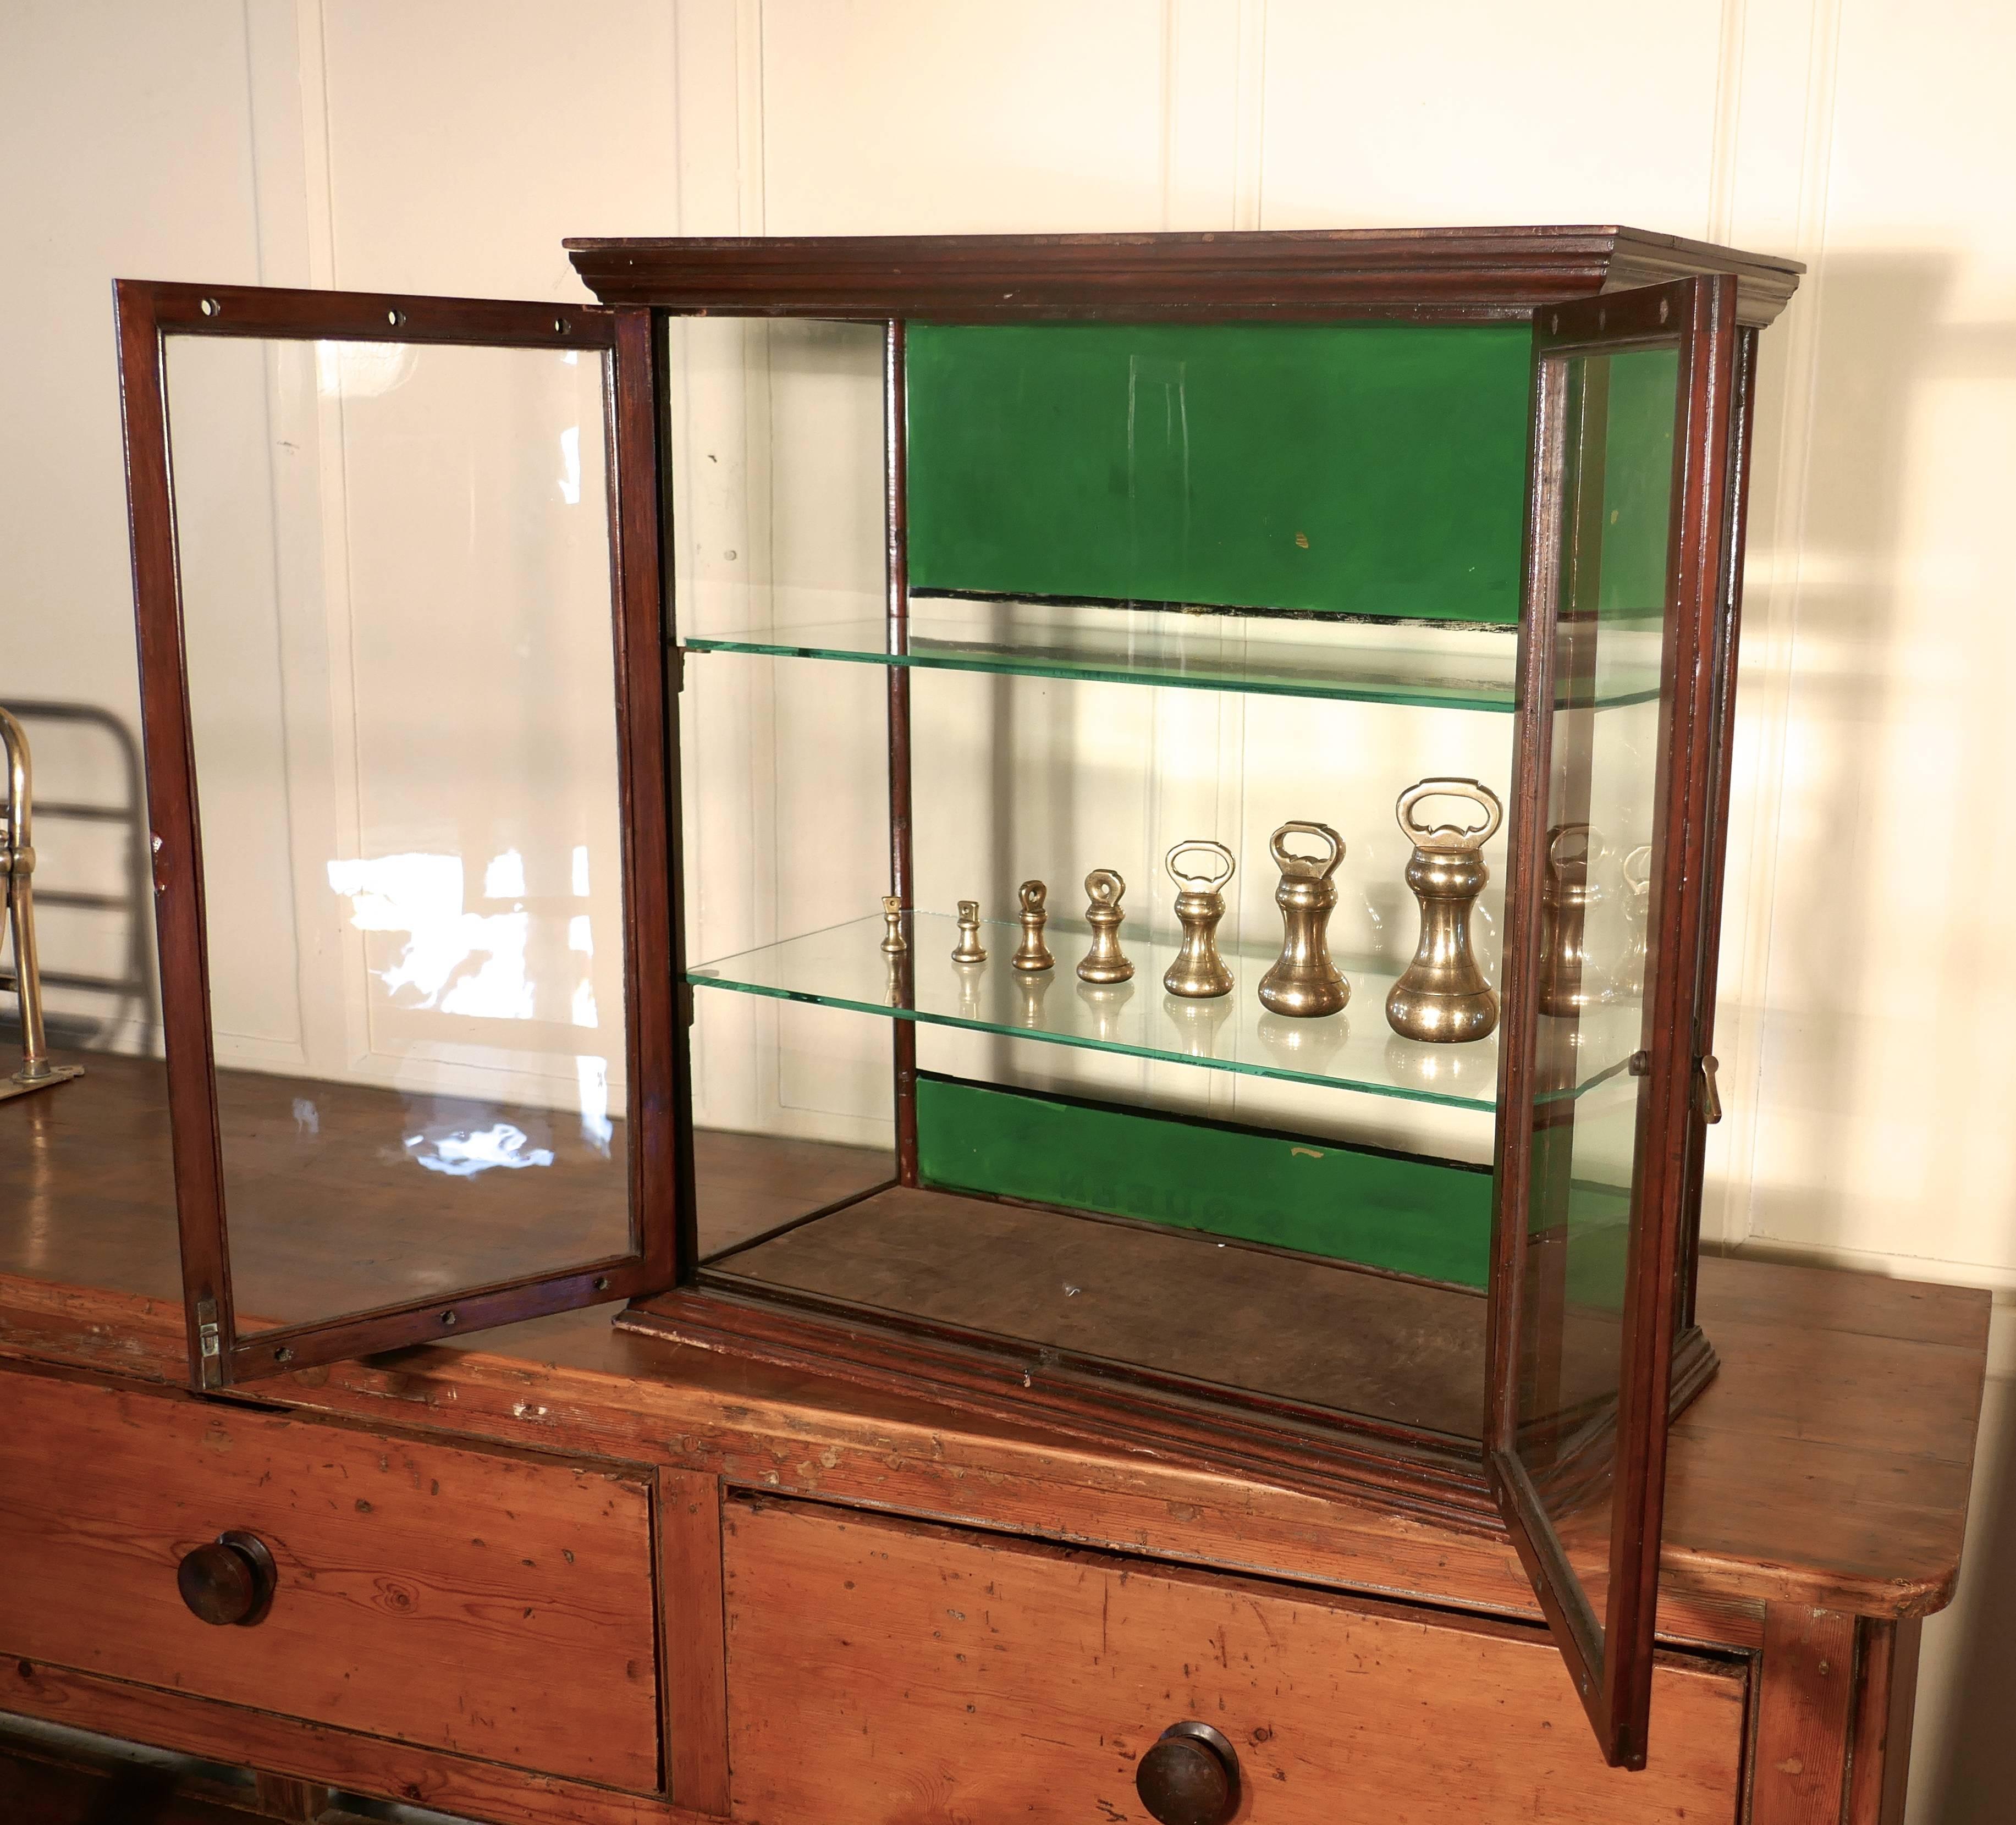 Victorian counter top shop display cabinet, sweet shop 

This glazed shop display cabinet is made mahogany, it has advertising banners for Fry’s painted across the top and bottom at the front, these are in the original green color used by Fry’s,